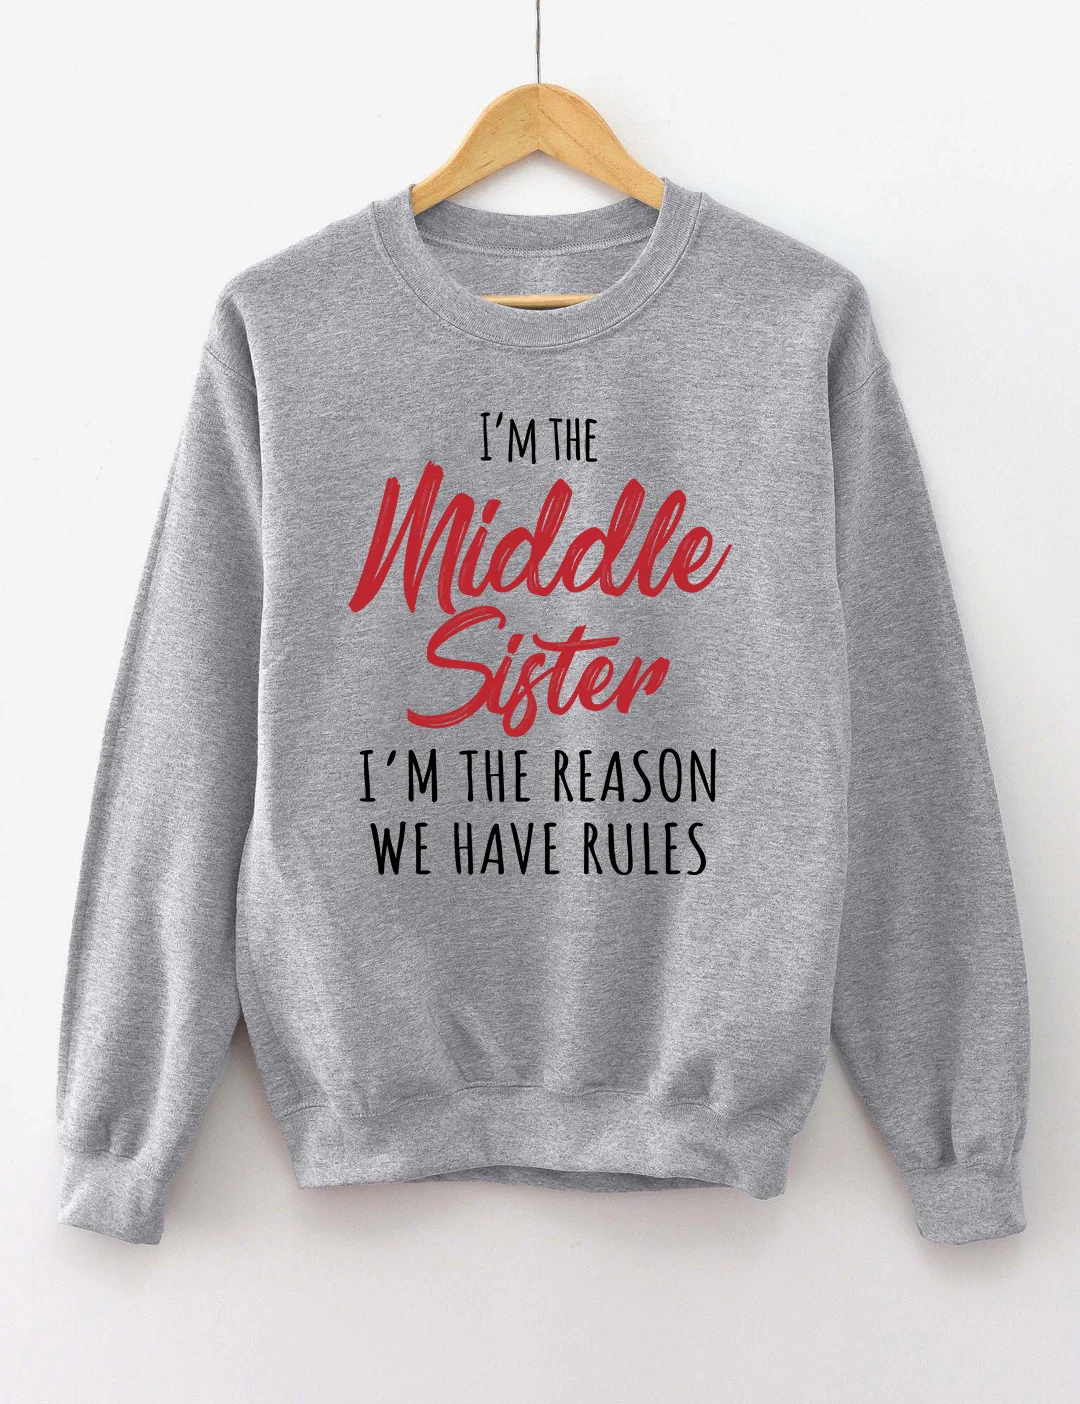 I'm The Middle Sister I'm The Reason We Have Rules Sweatshirt